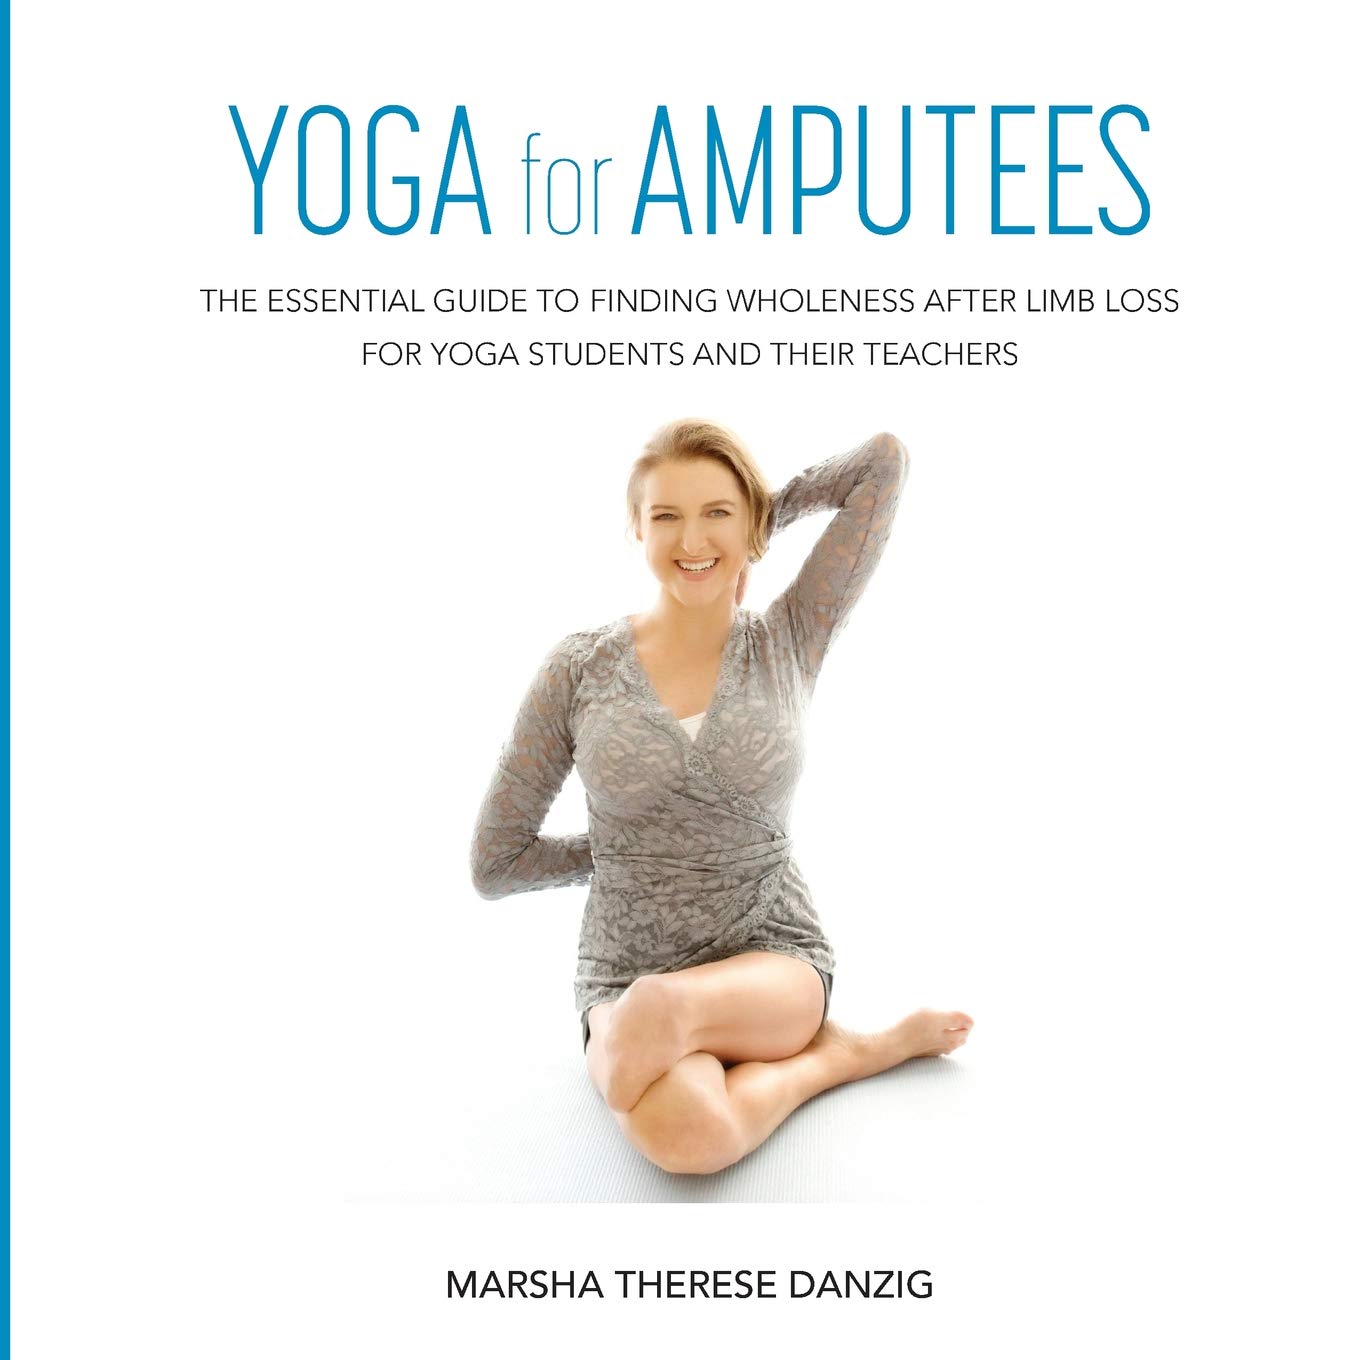 Yoga for Amputees: The Essential Guide to Finding Wholeness After Limb Loss for Yoga Students and Their Teachers